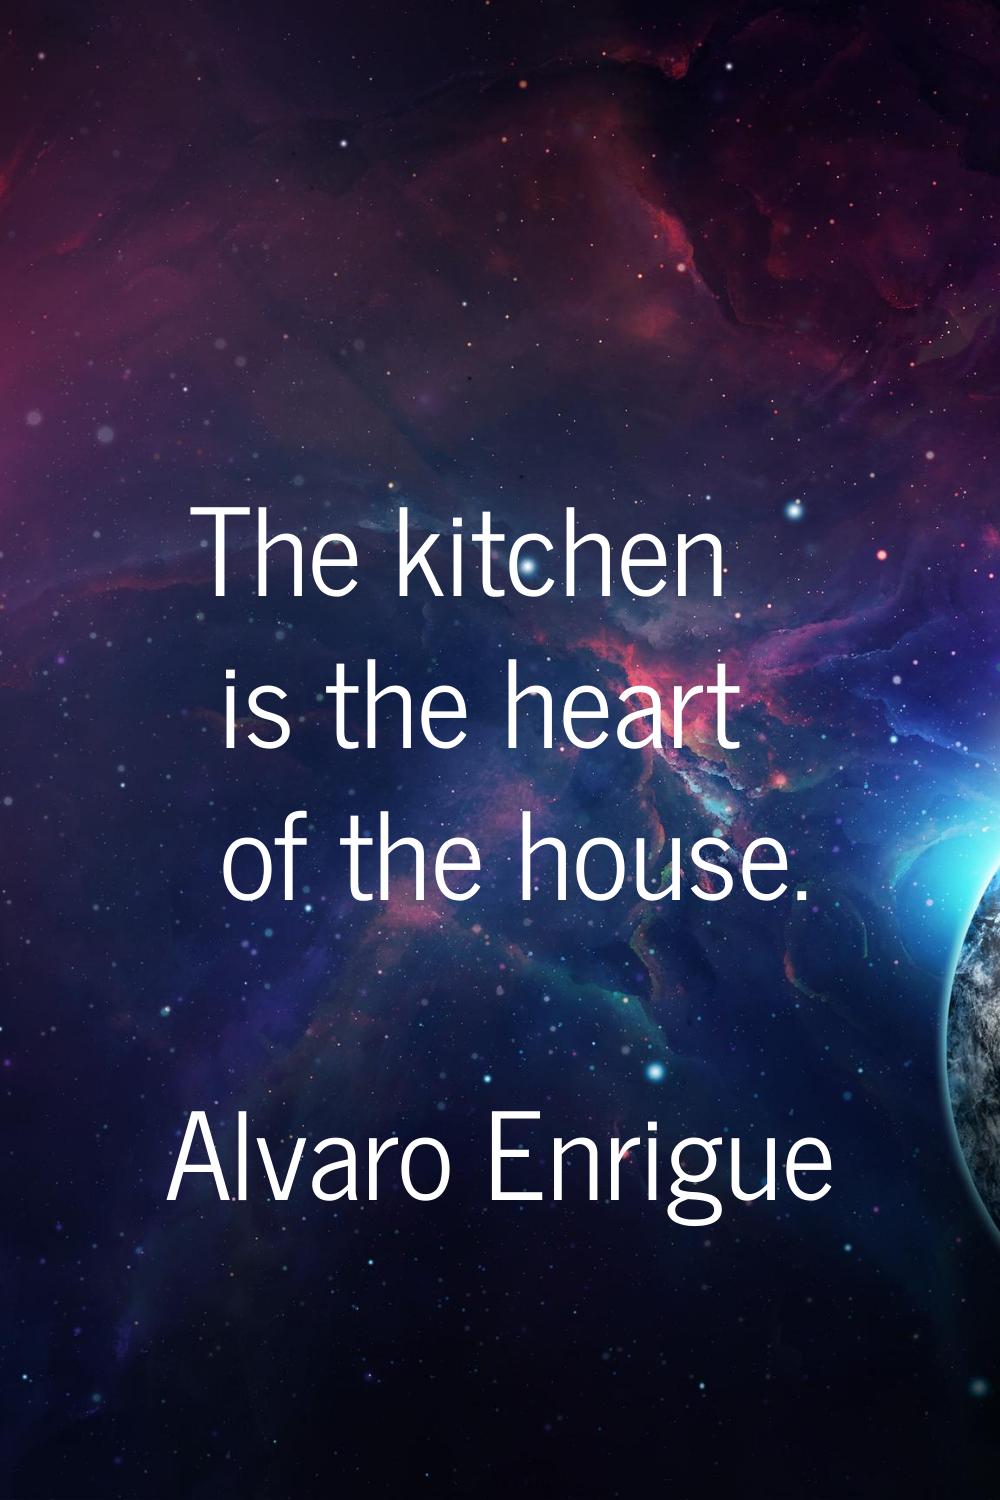 The kitchen is the heart of the house.